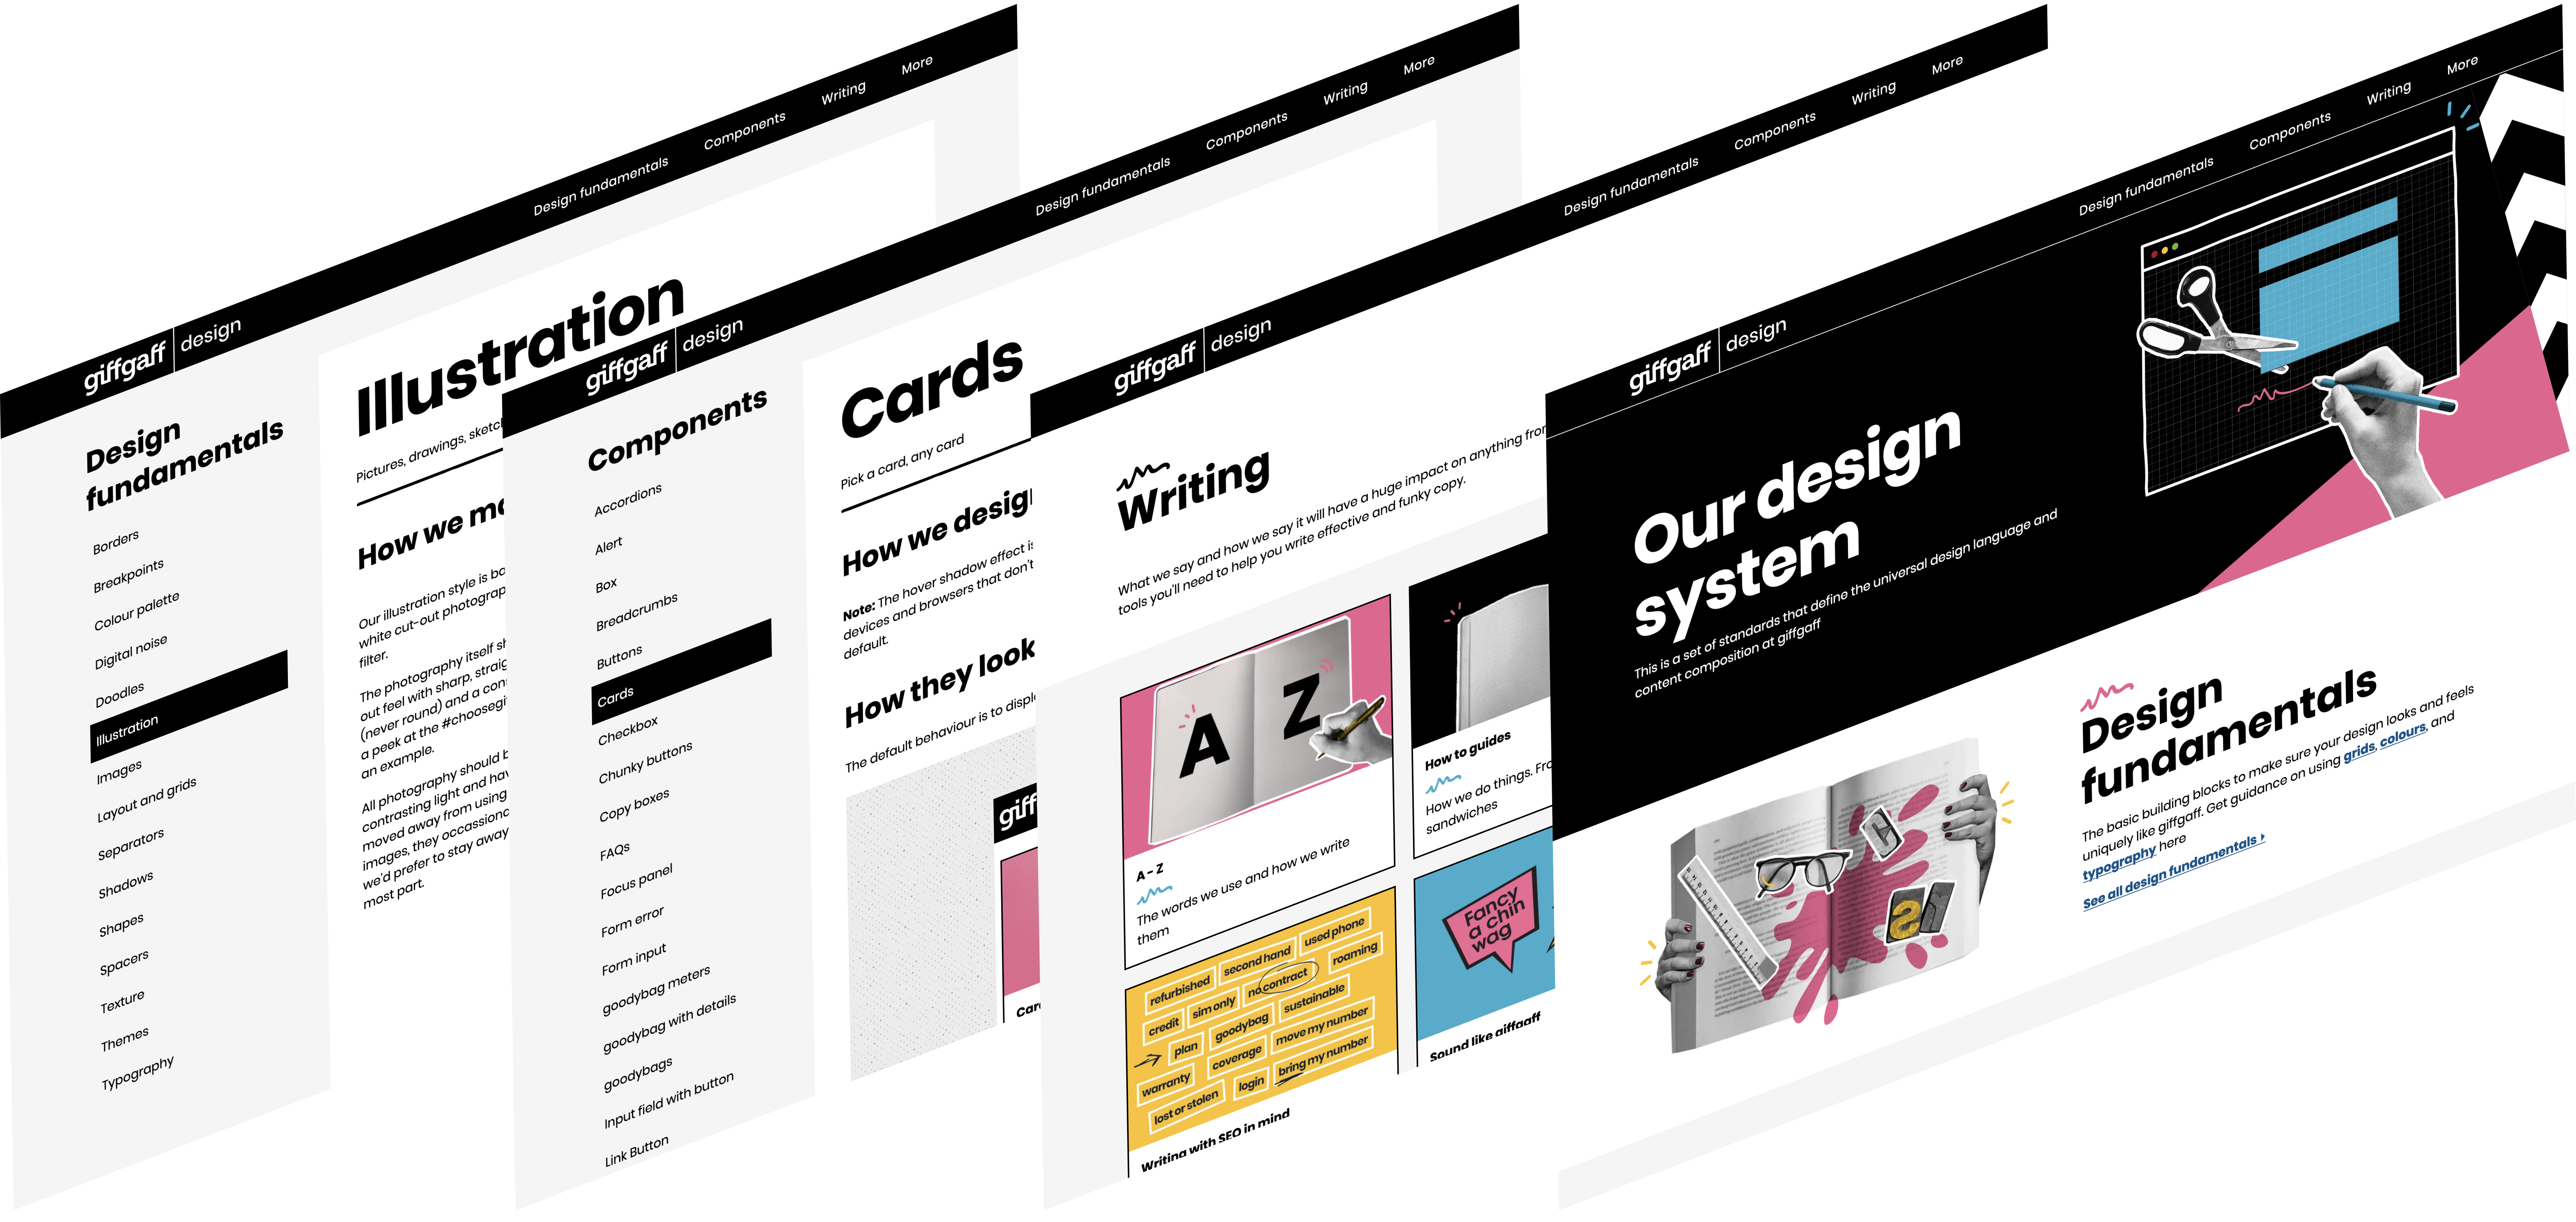 Components in the design system